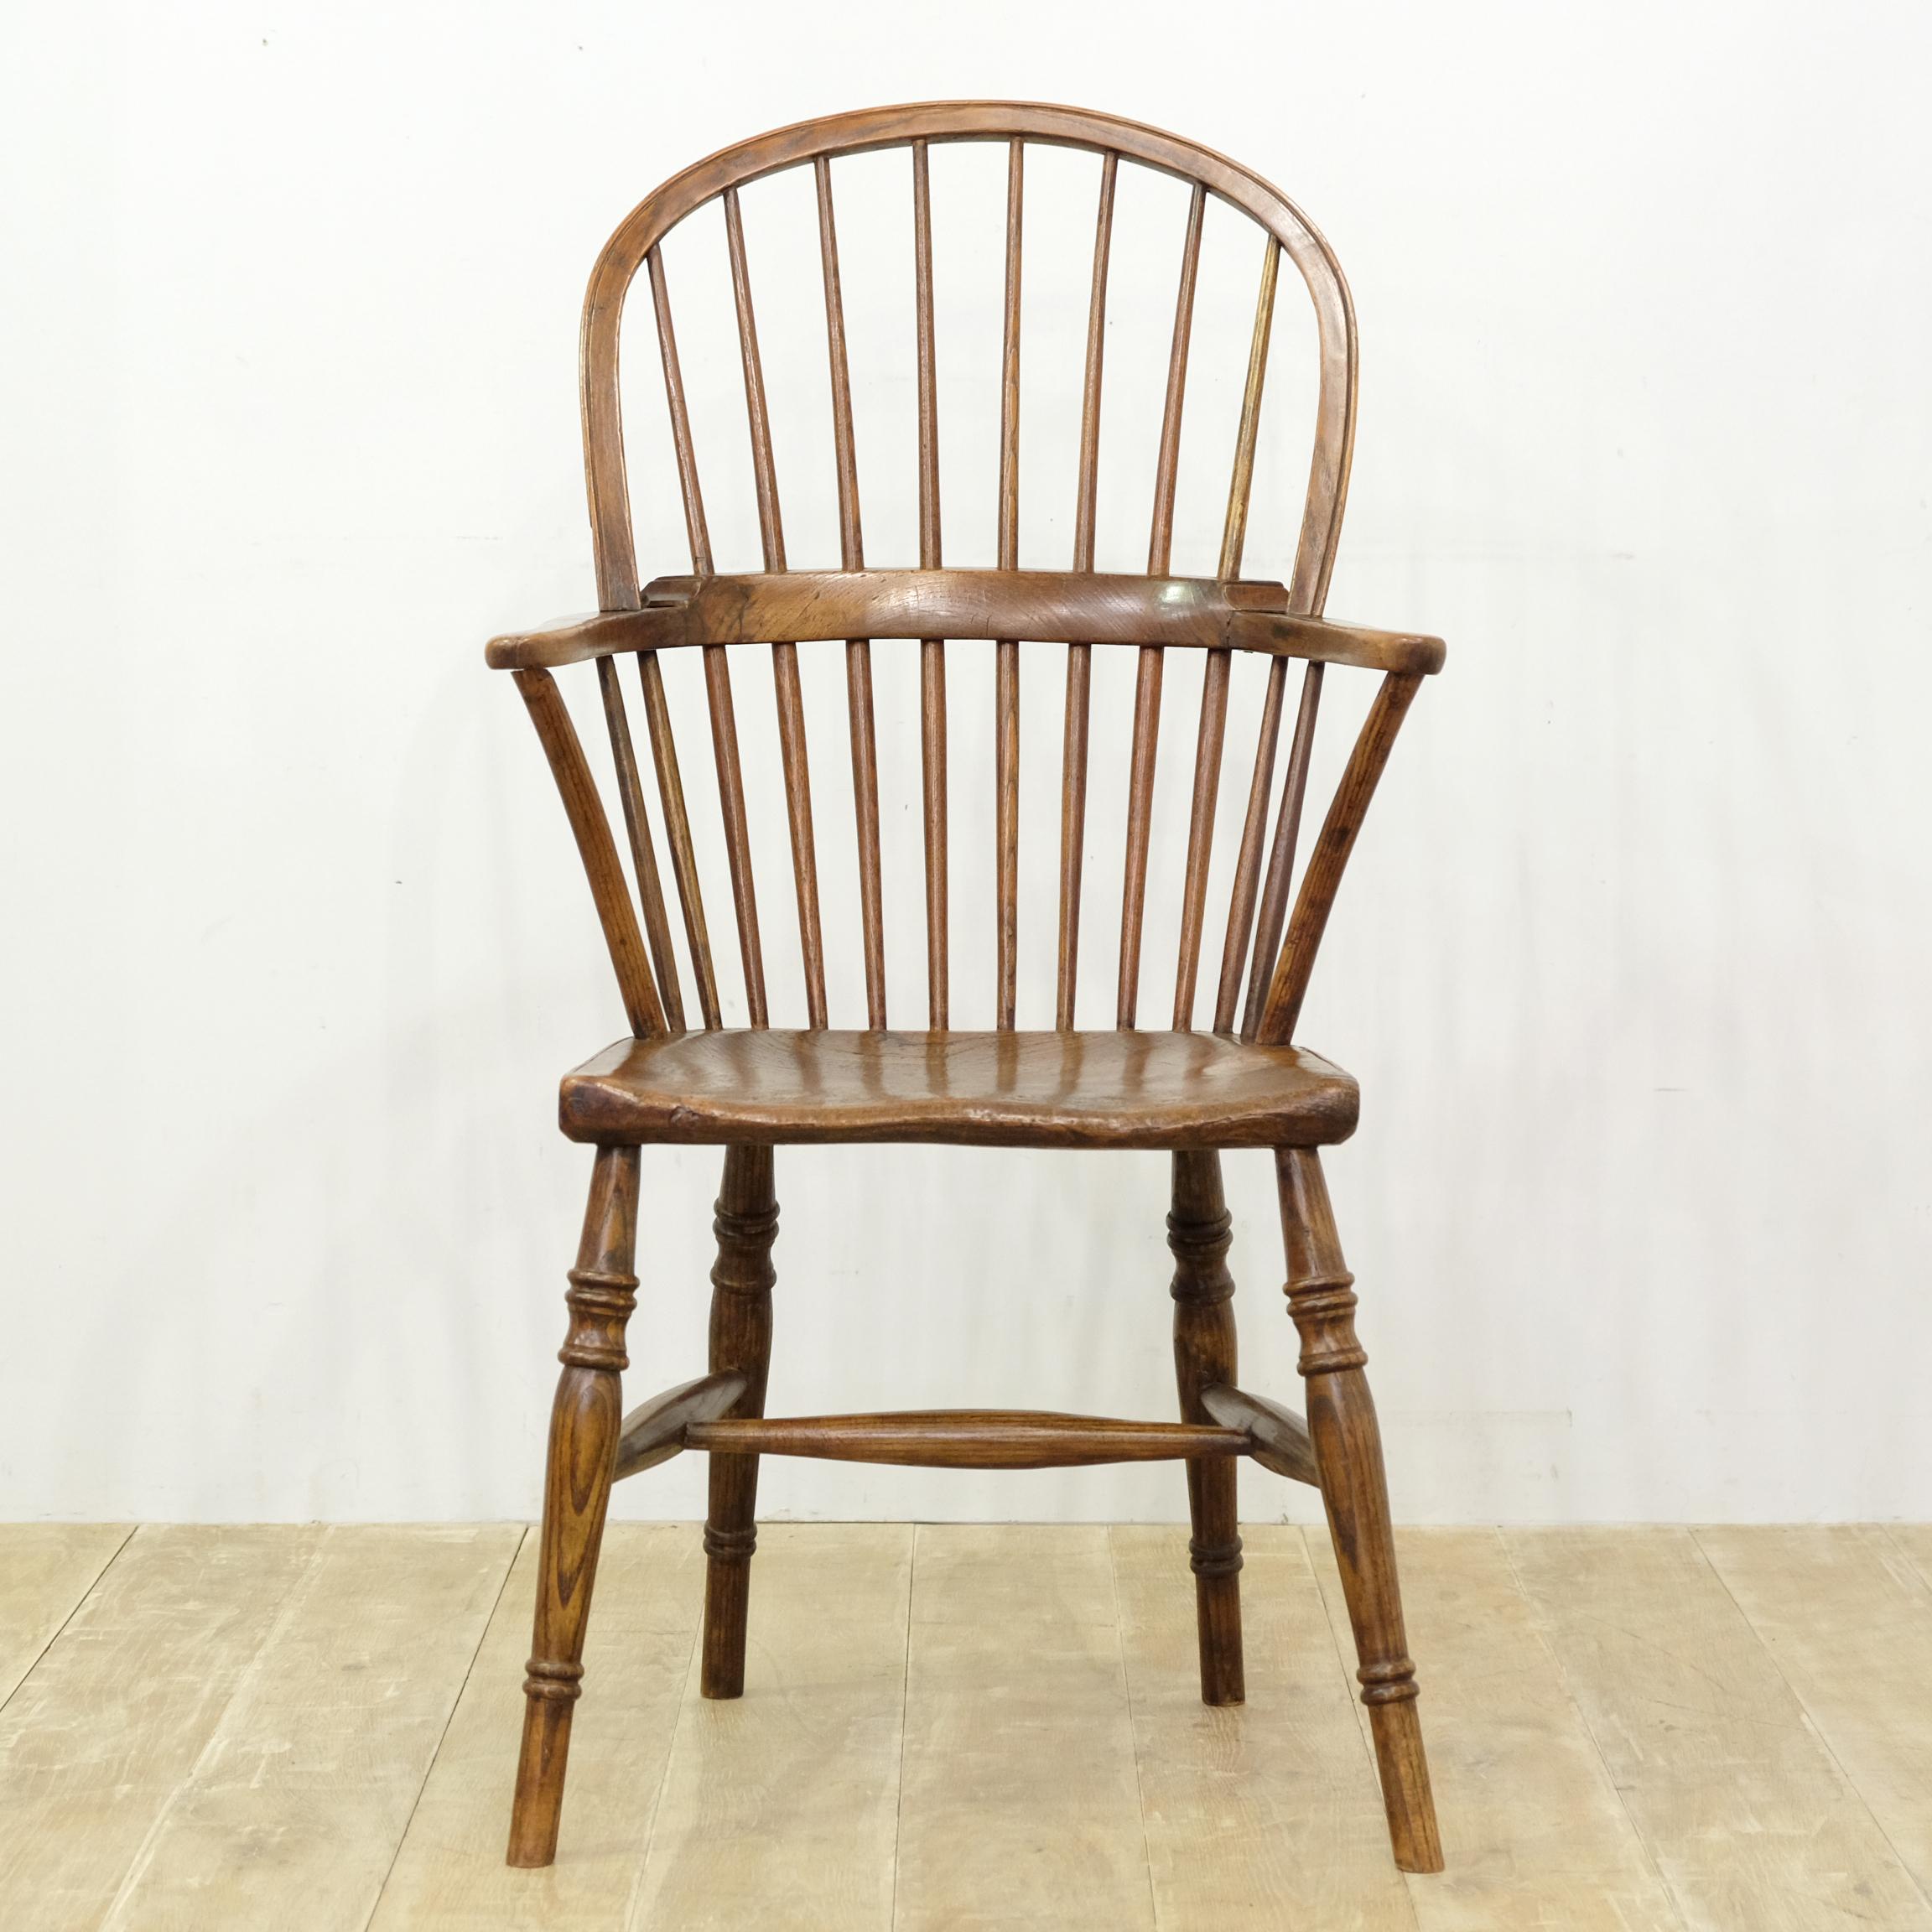 Characterful Georgian ash and elm Windsor chair. Flat-fronted elm seat with interesting grain pattern and tactile feel. Decoratively turned legs united by tapering H stretcher. Crook-shaped arm supports with typical three-part arm. Lovely rich